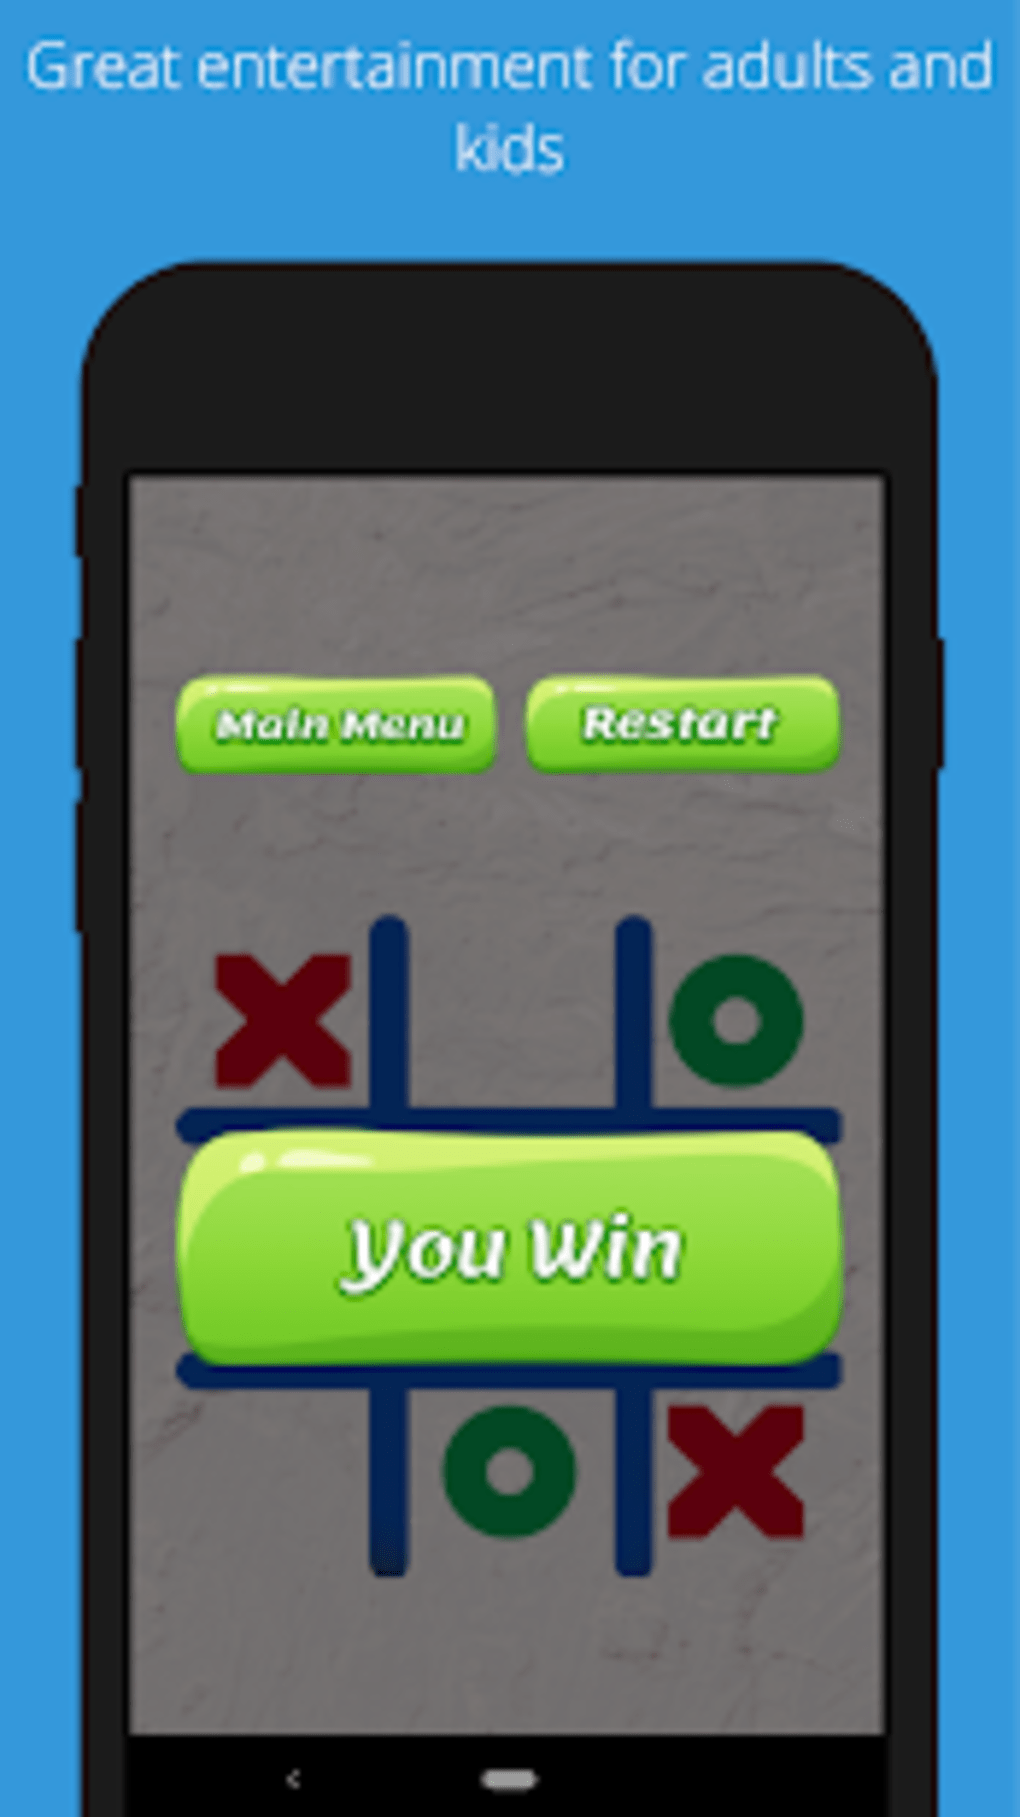 Tic Tac Toe 2 Player - xo game APK for Android Download